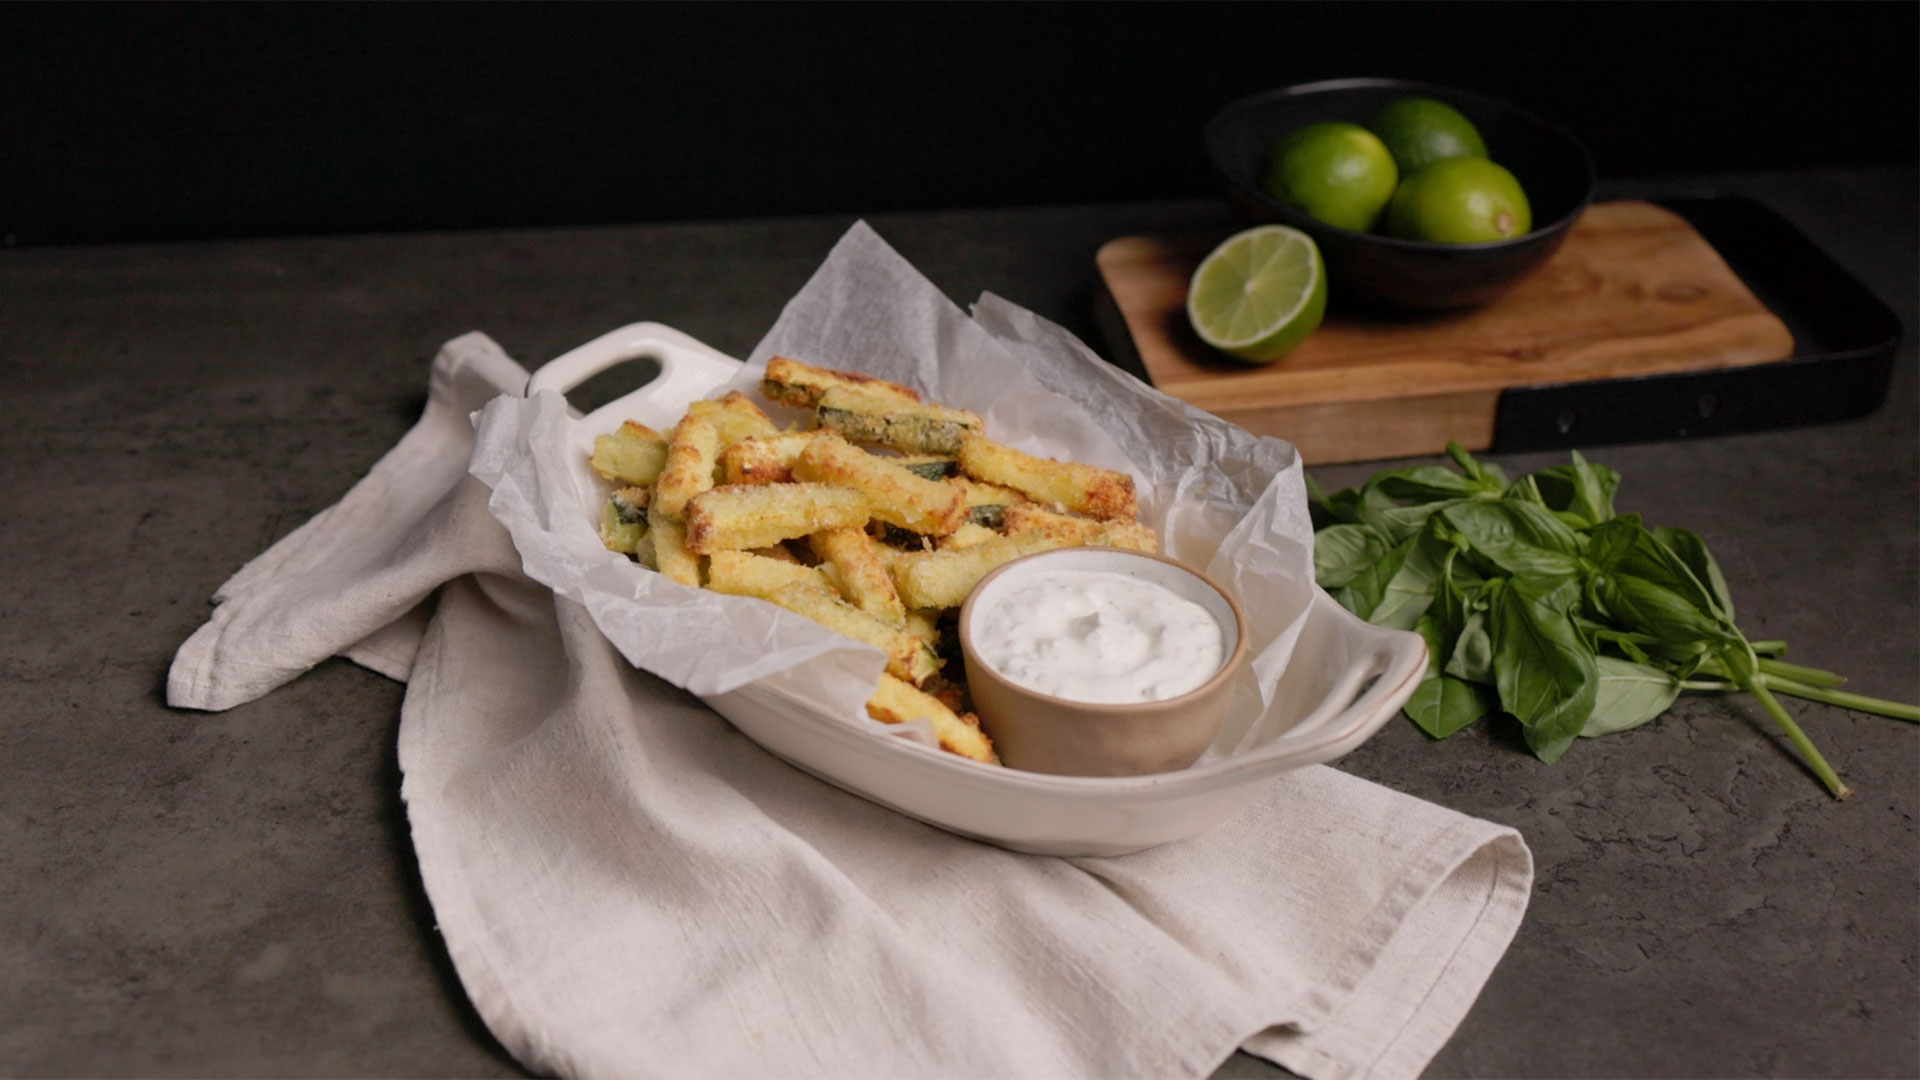 Zucchini fries with parmesan